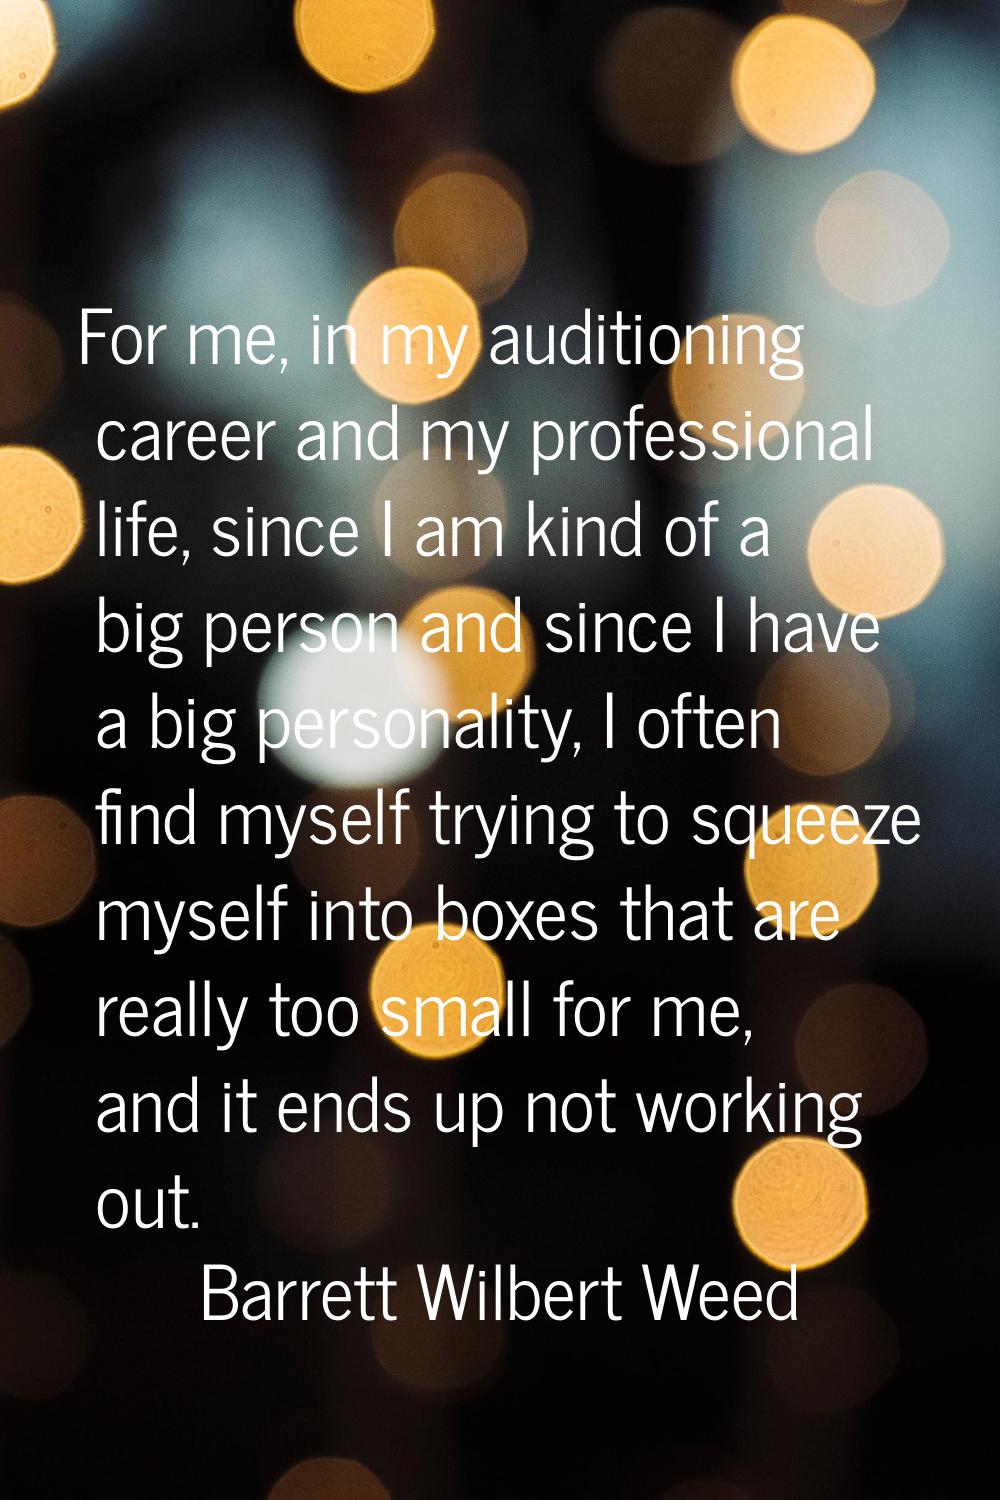 For me, in my auditioning career and my professional life, since I am kind of a big person and sinc